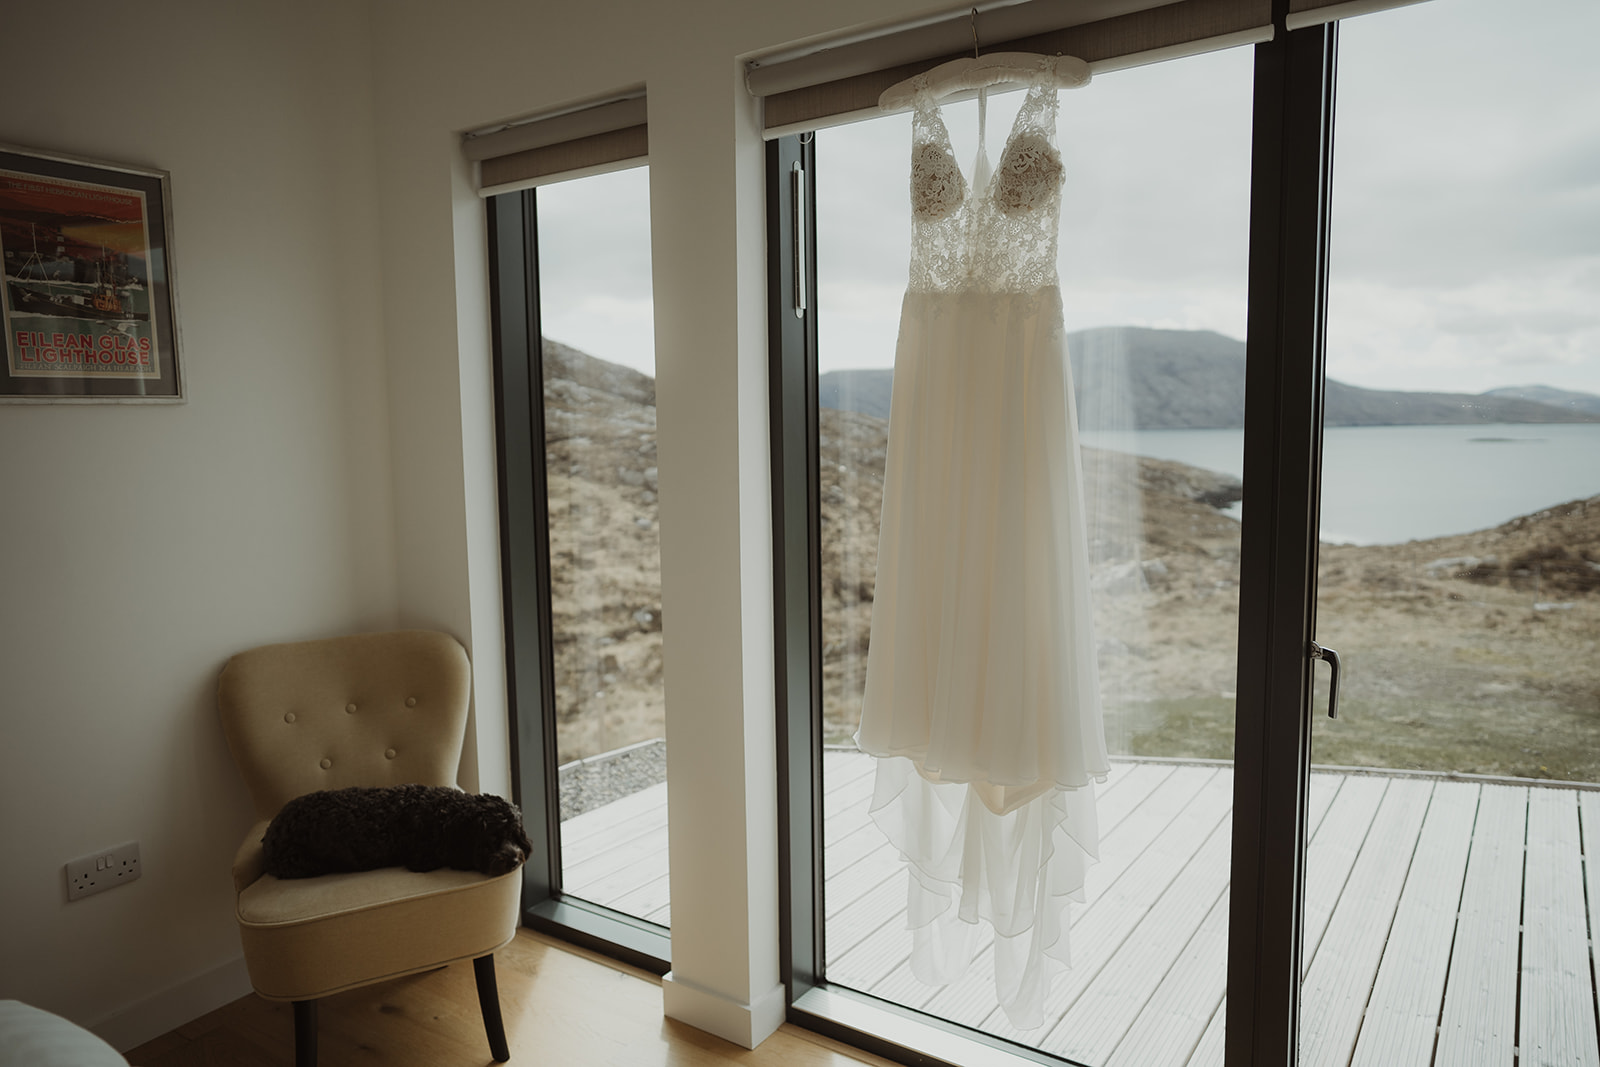 weddings in the outer hebrides